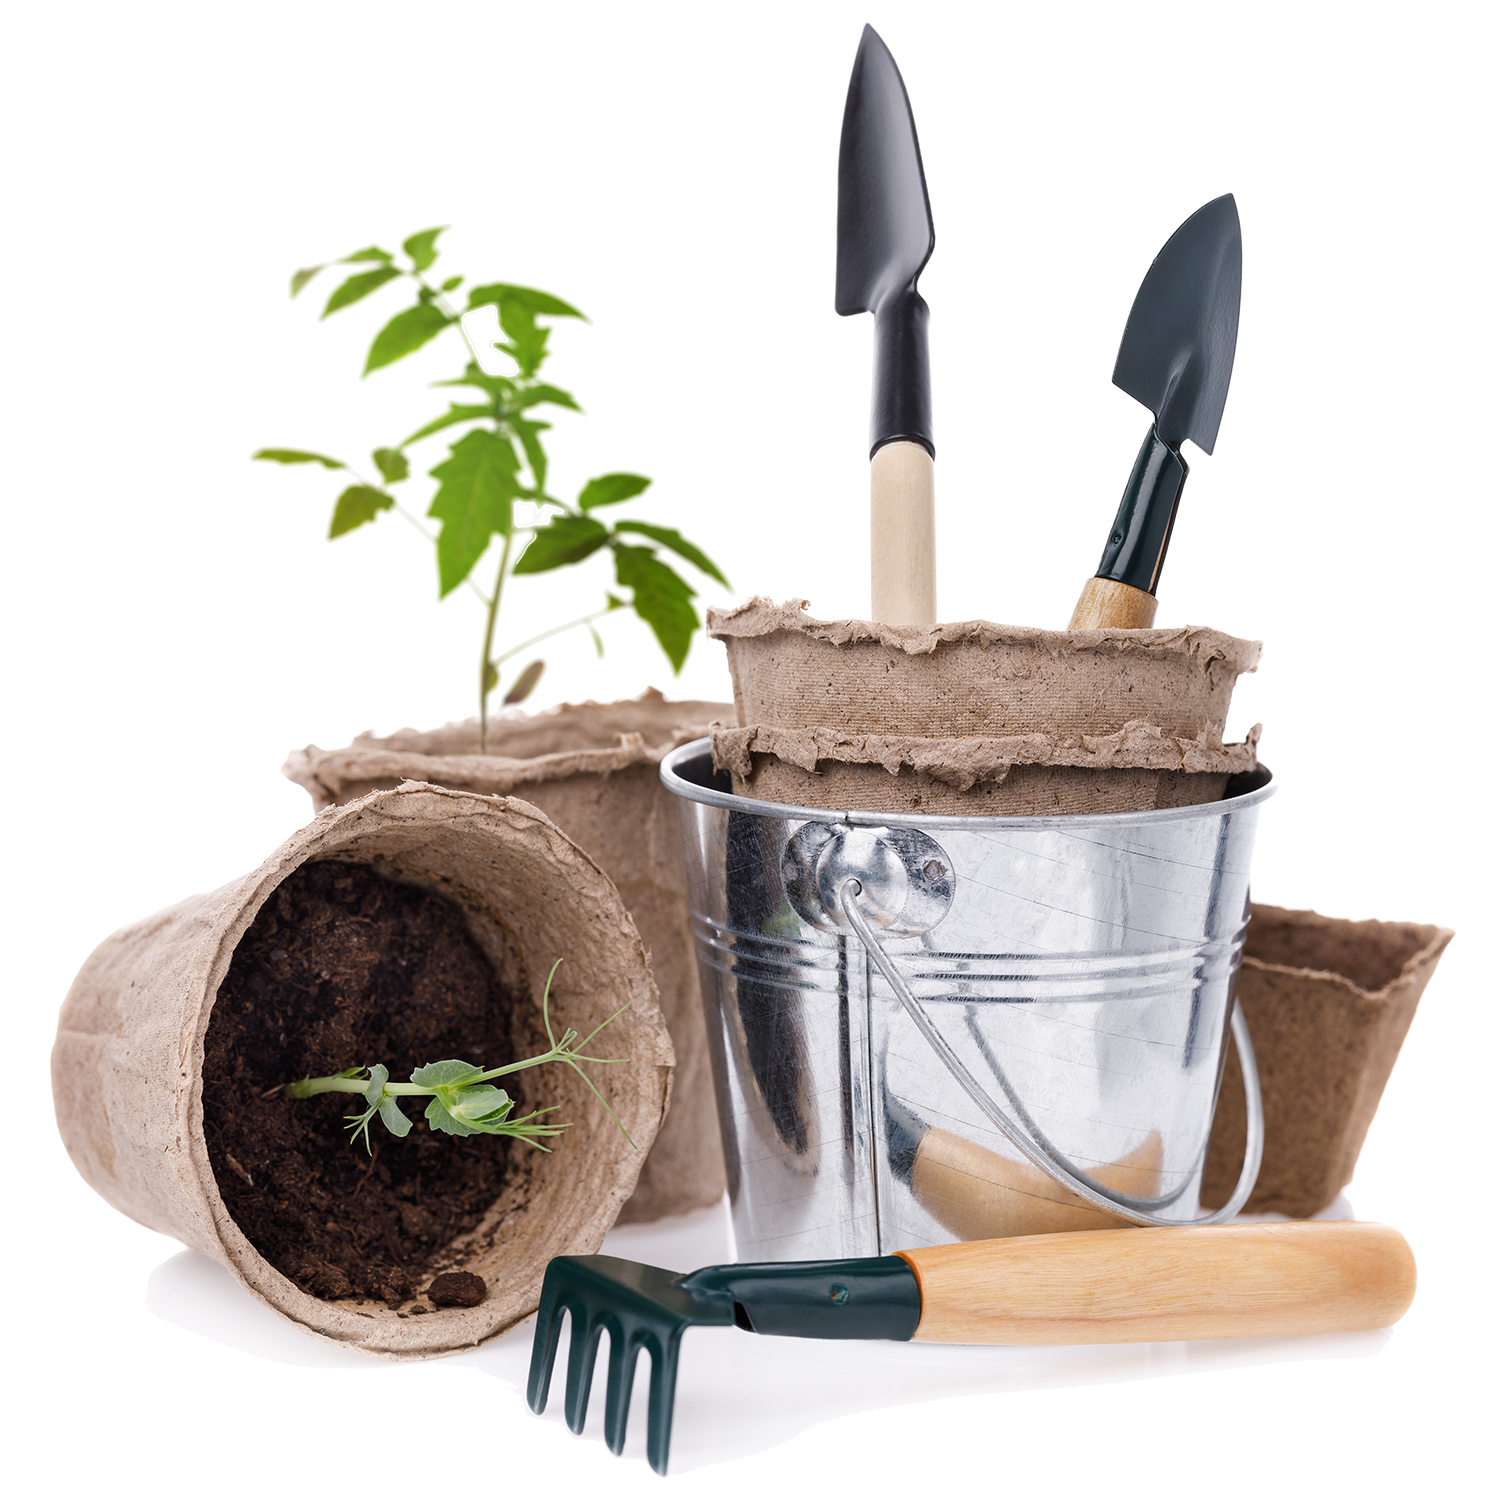 Tools Used for Landscaping and gardening